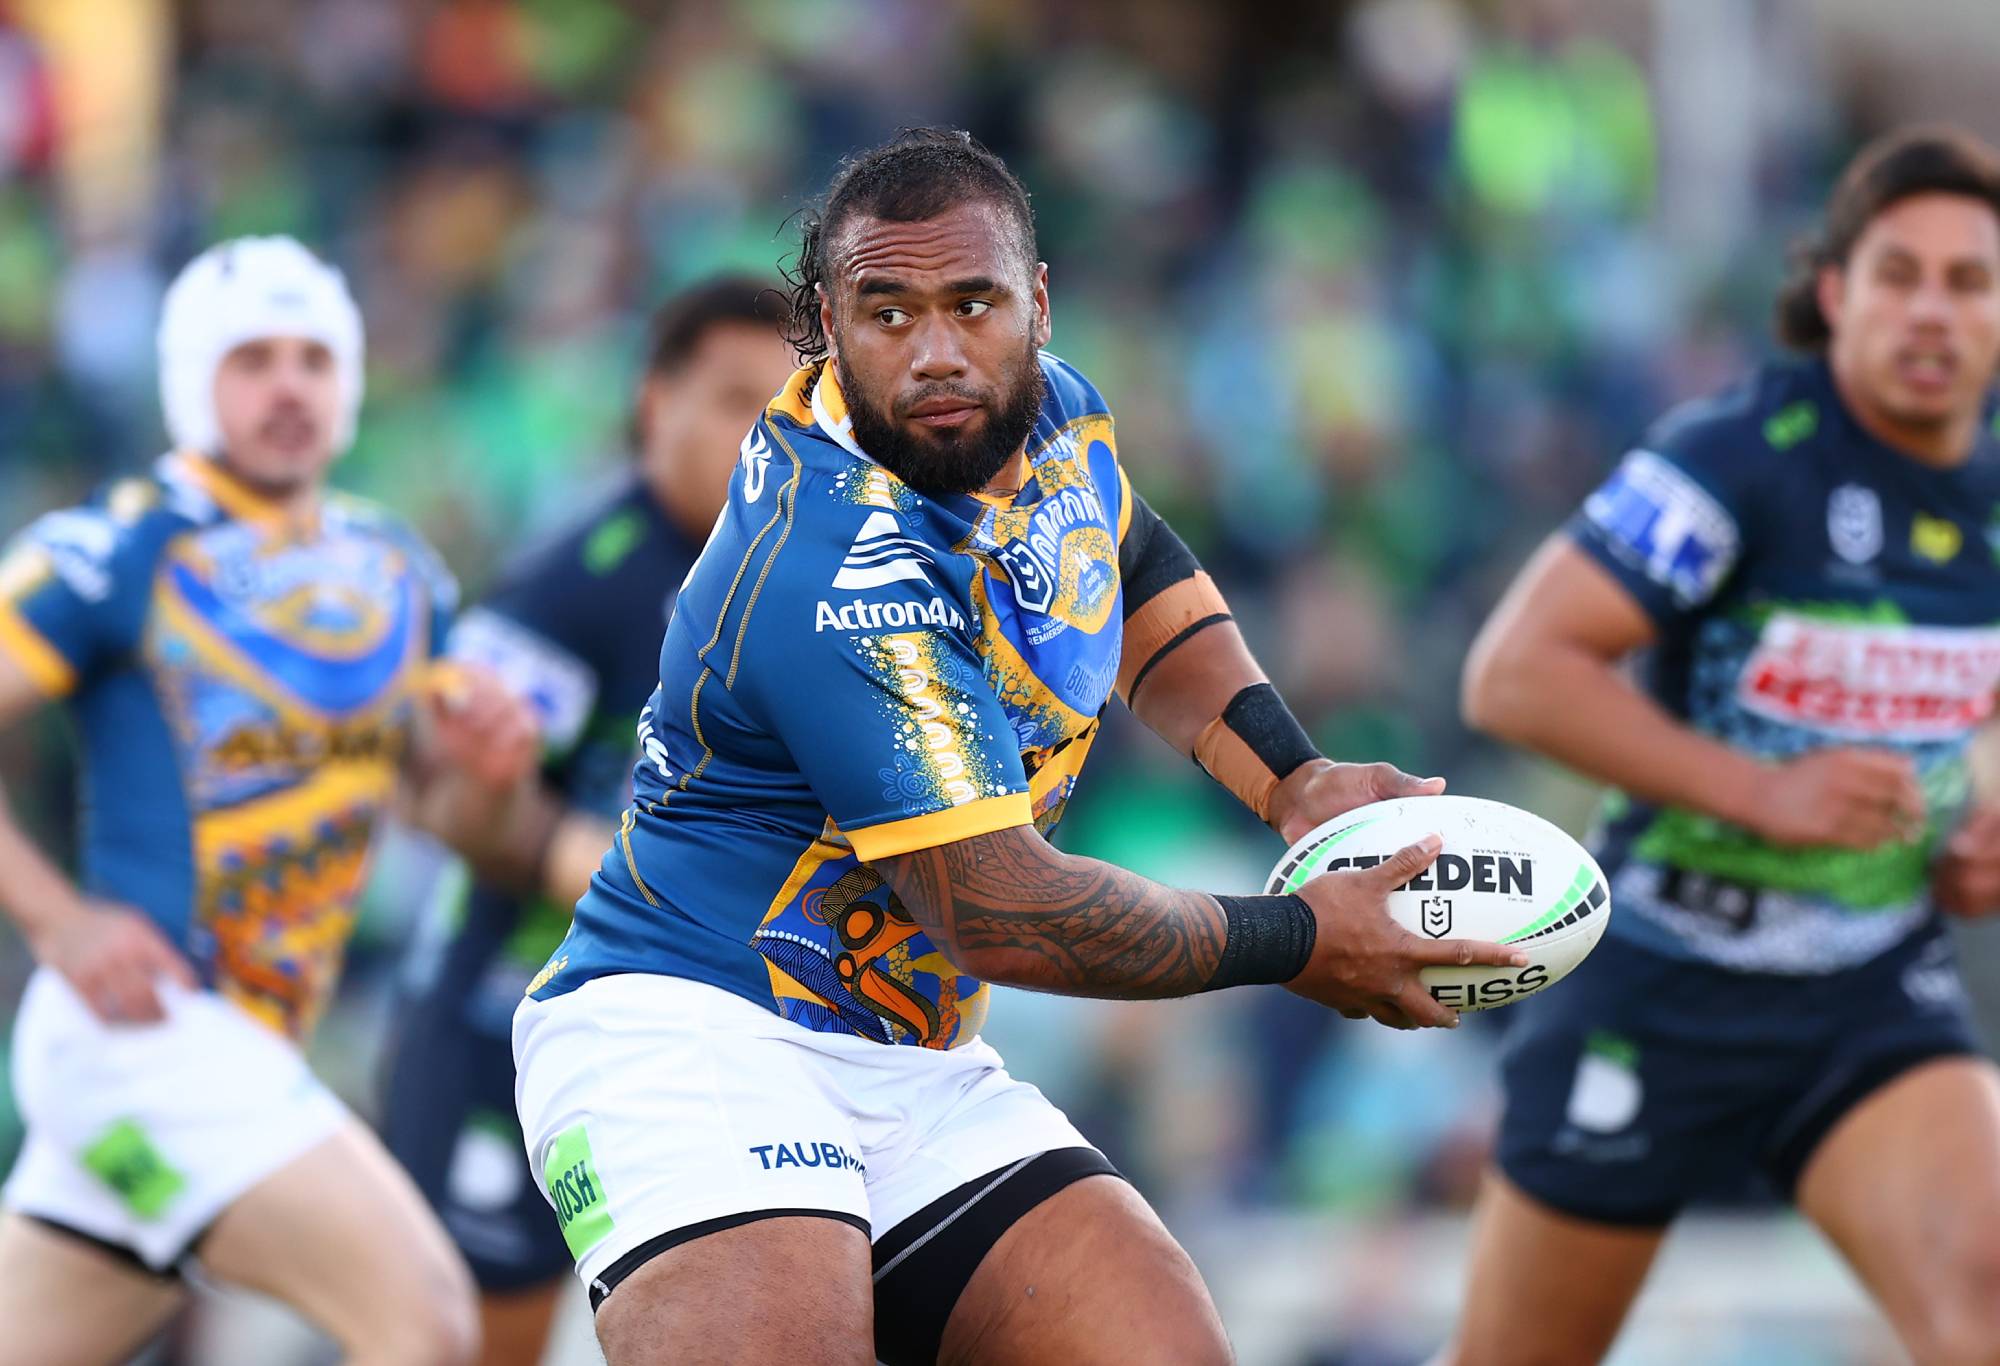 CANBERRA, AUSTRALIA - MAY 29: Junior Paulo of the Eels in action during the round 12 NRL match between the Canberra Raiders and the Parramatta Eels at GIO Stadium, on May 29, 2022, in Canberra, Australia. (Photo by Mark Nolan/Getty Images)